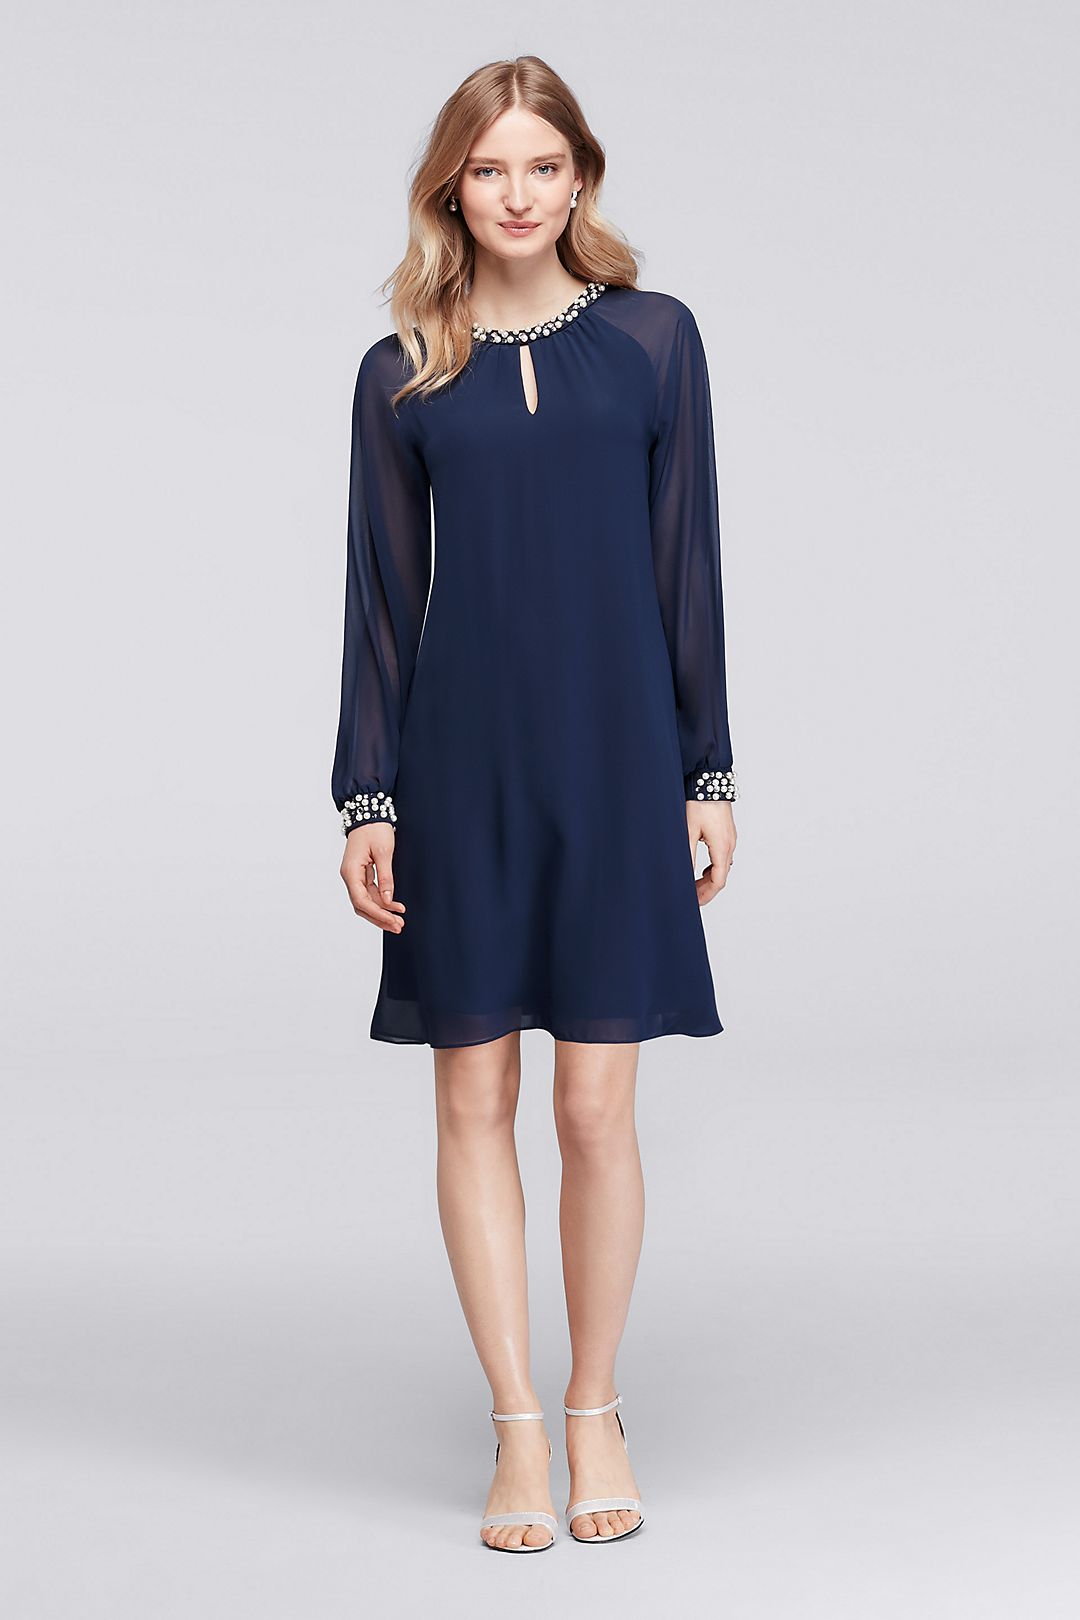 Knee Length Dress with Pearls at Neck and Cuffs Image 4